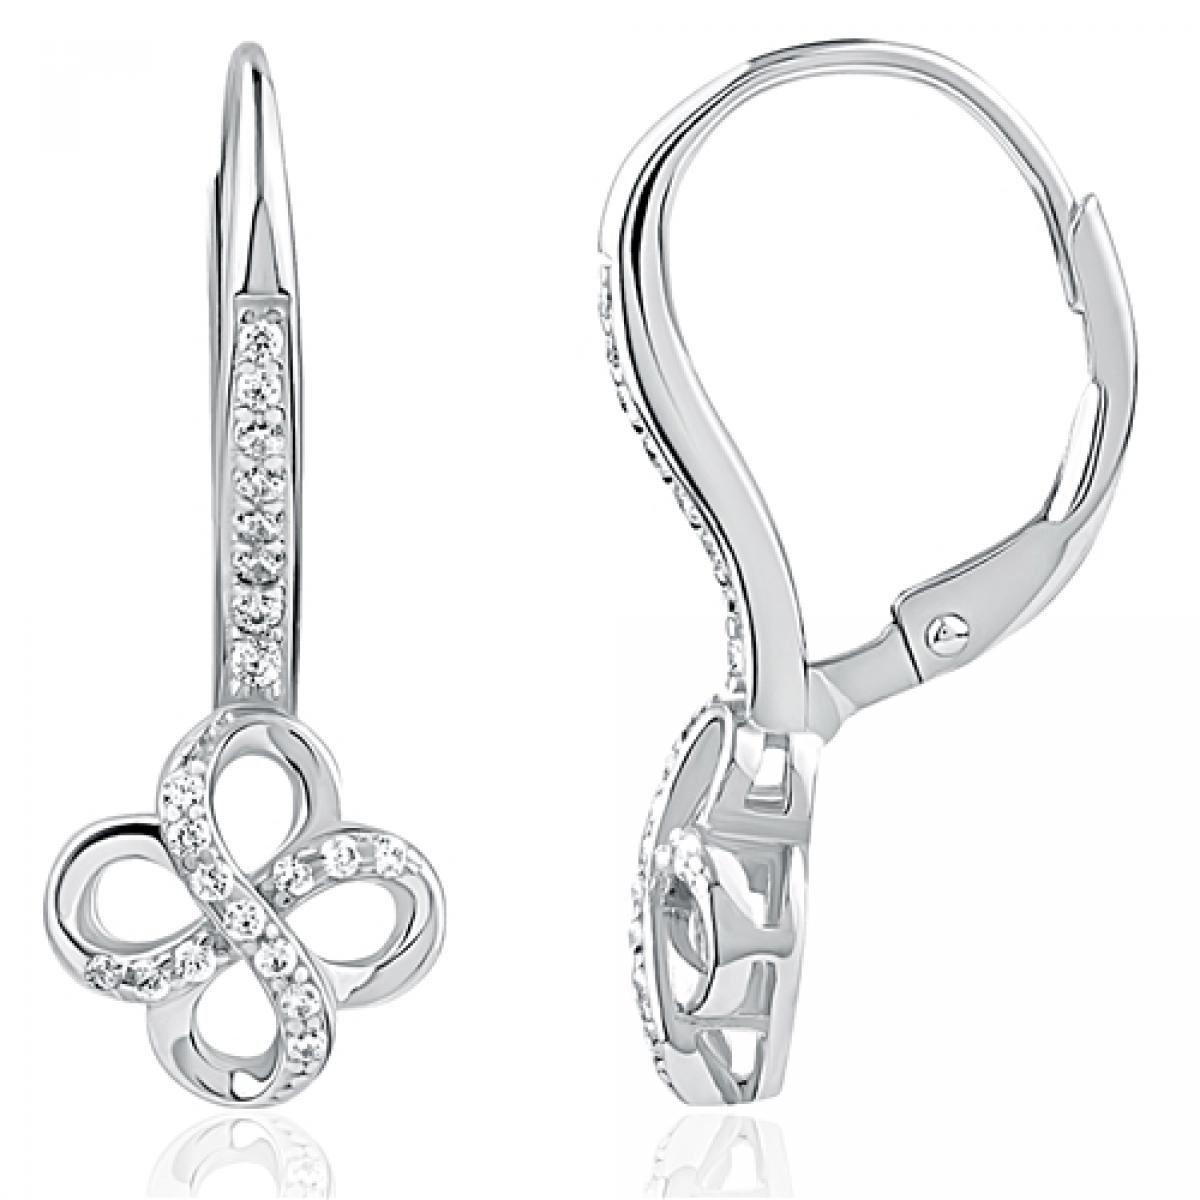 Picture of MDR Trading SS-EZ953 9.9 mm Silver & White Lever Back Clover with Cubic Zirconia Earrings